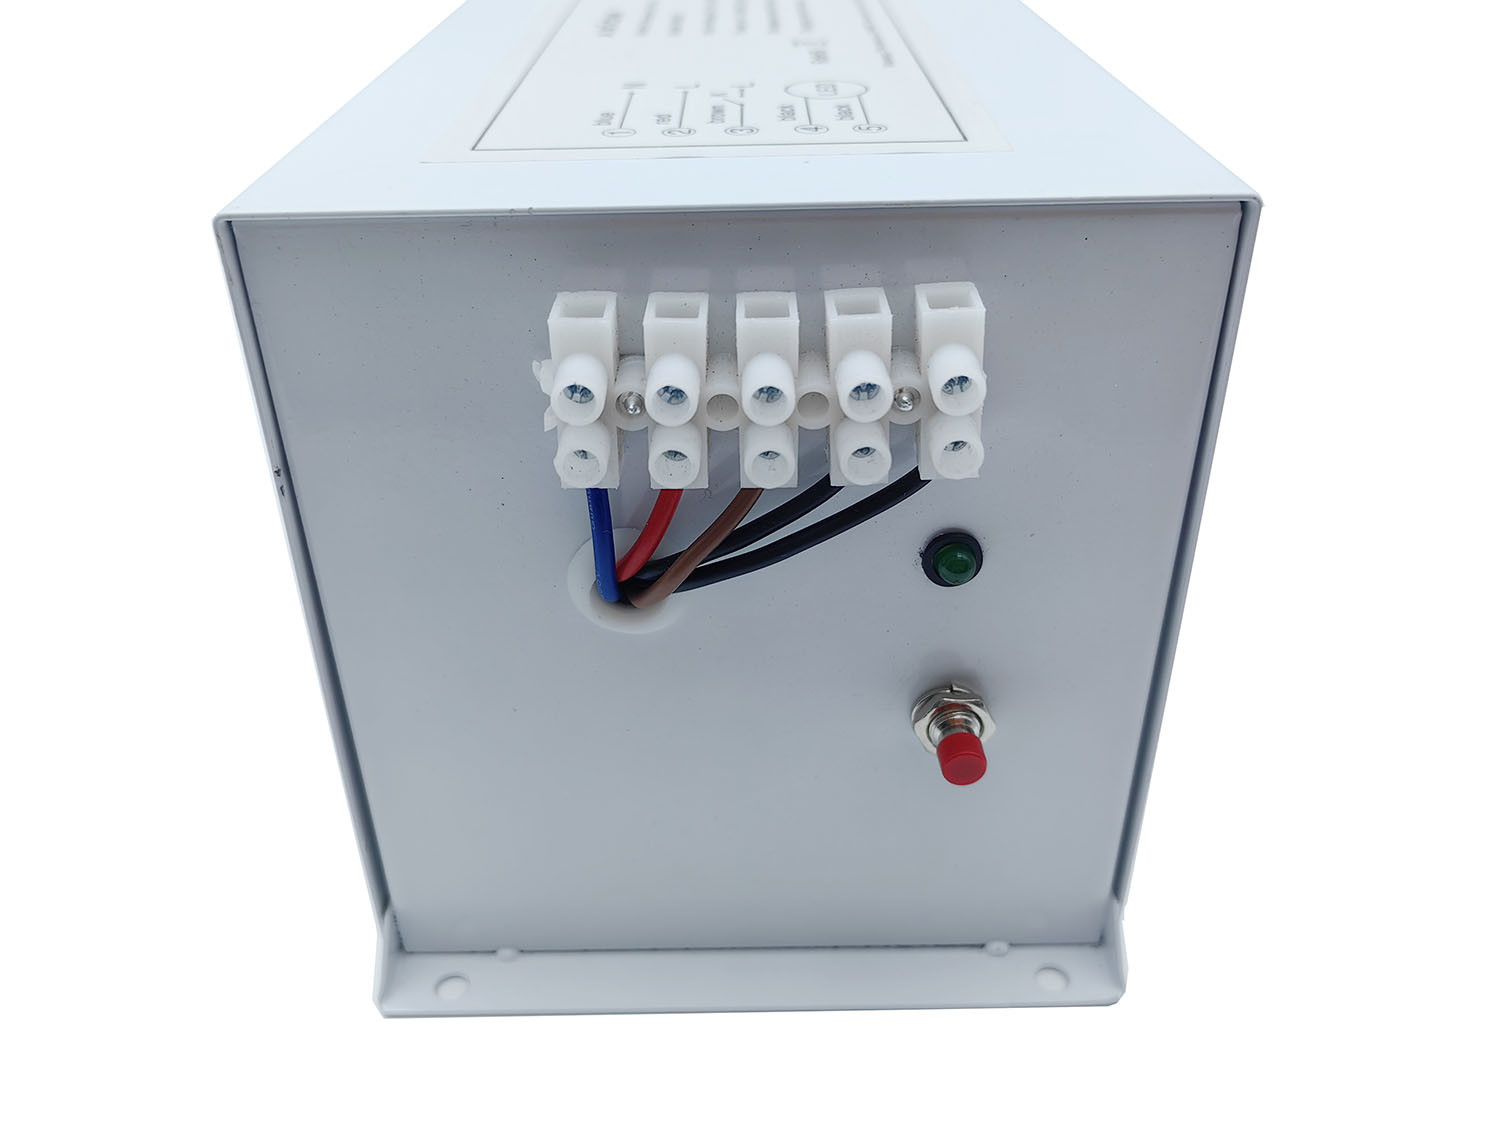 LED Emergency Driver for High Power LED Light (100-200W) with Back-up Battery, Emergency Driver Kits